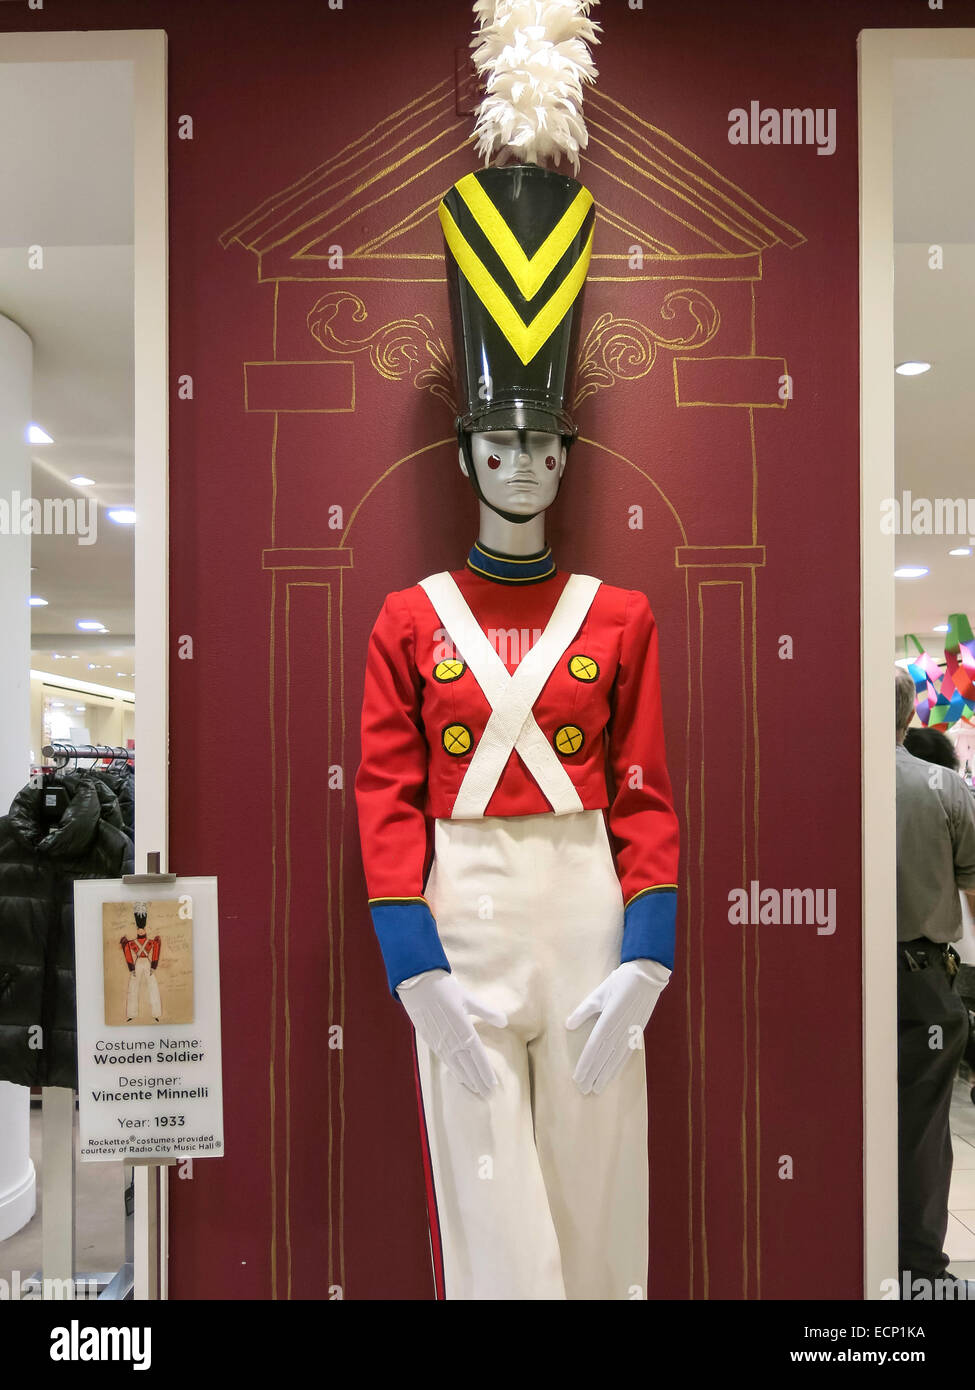 Rockettes Costumes Display in Saks Fifth Avenue Flagship Store